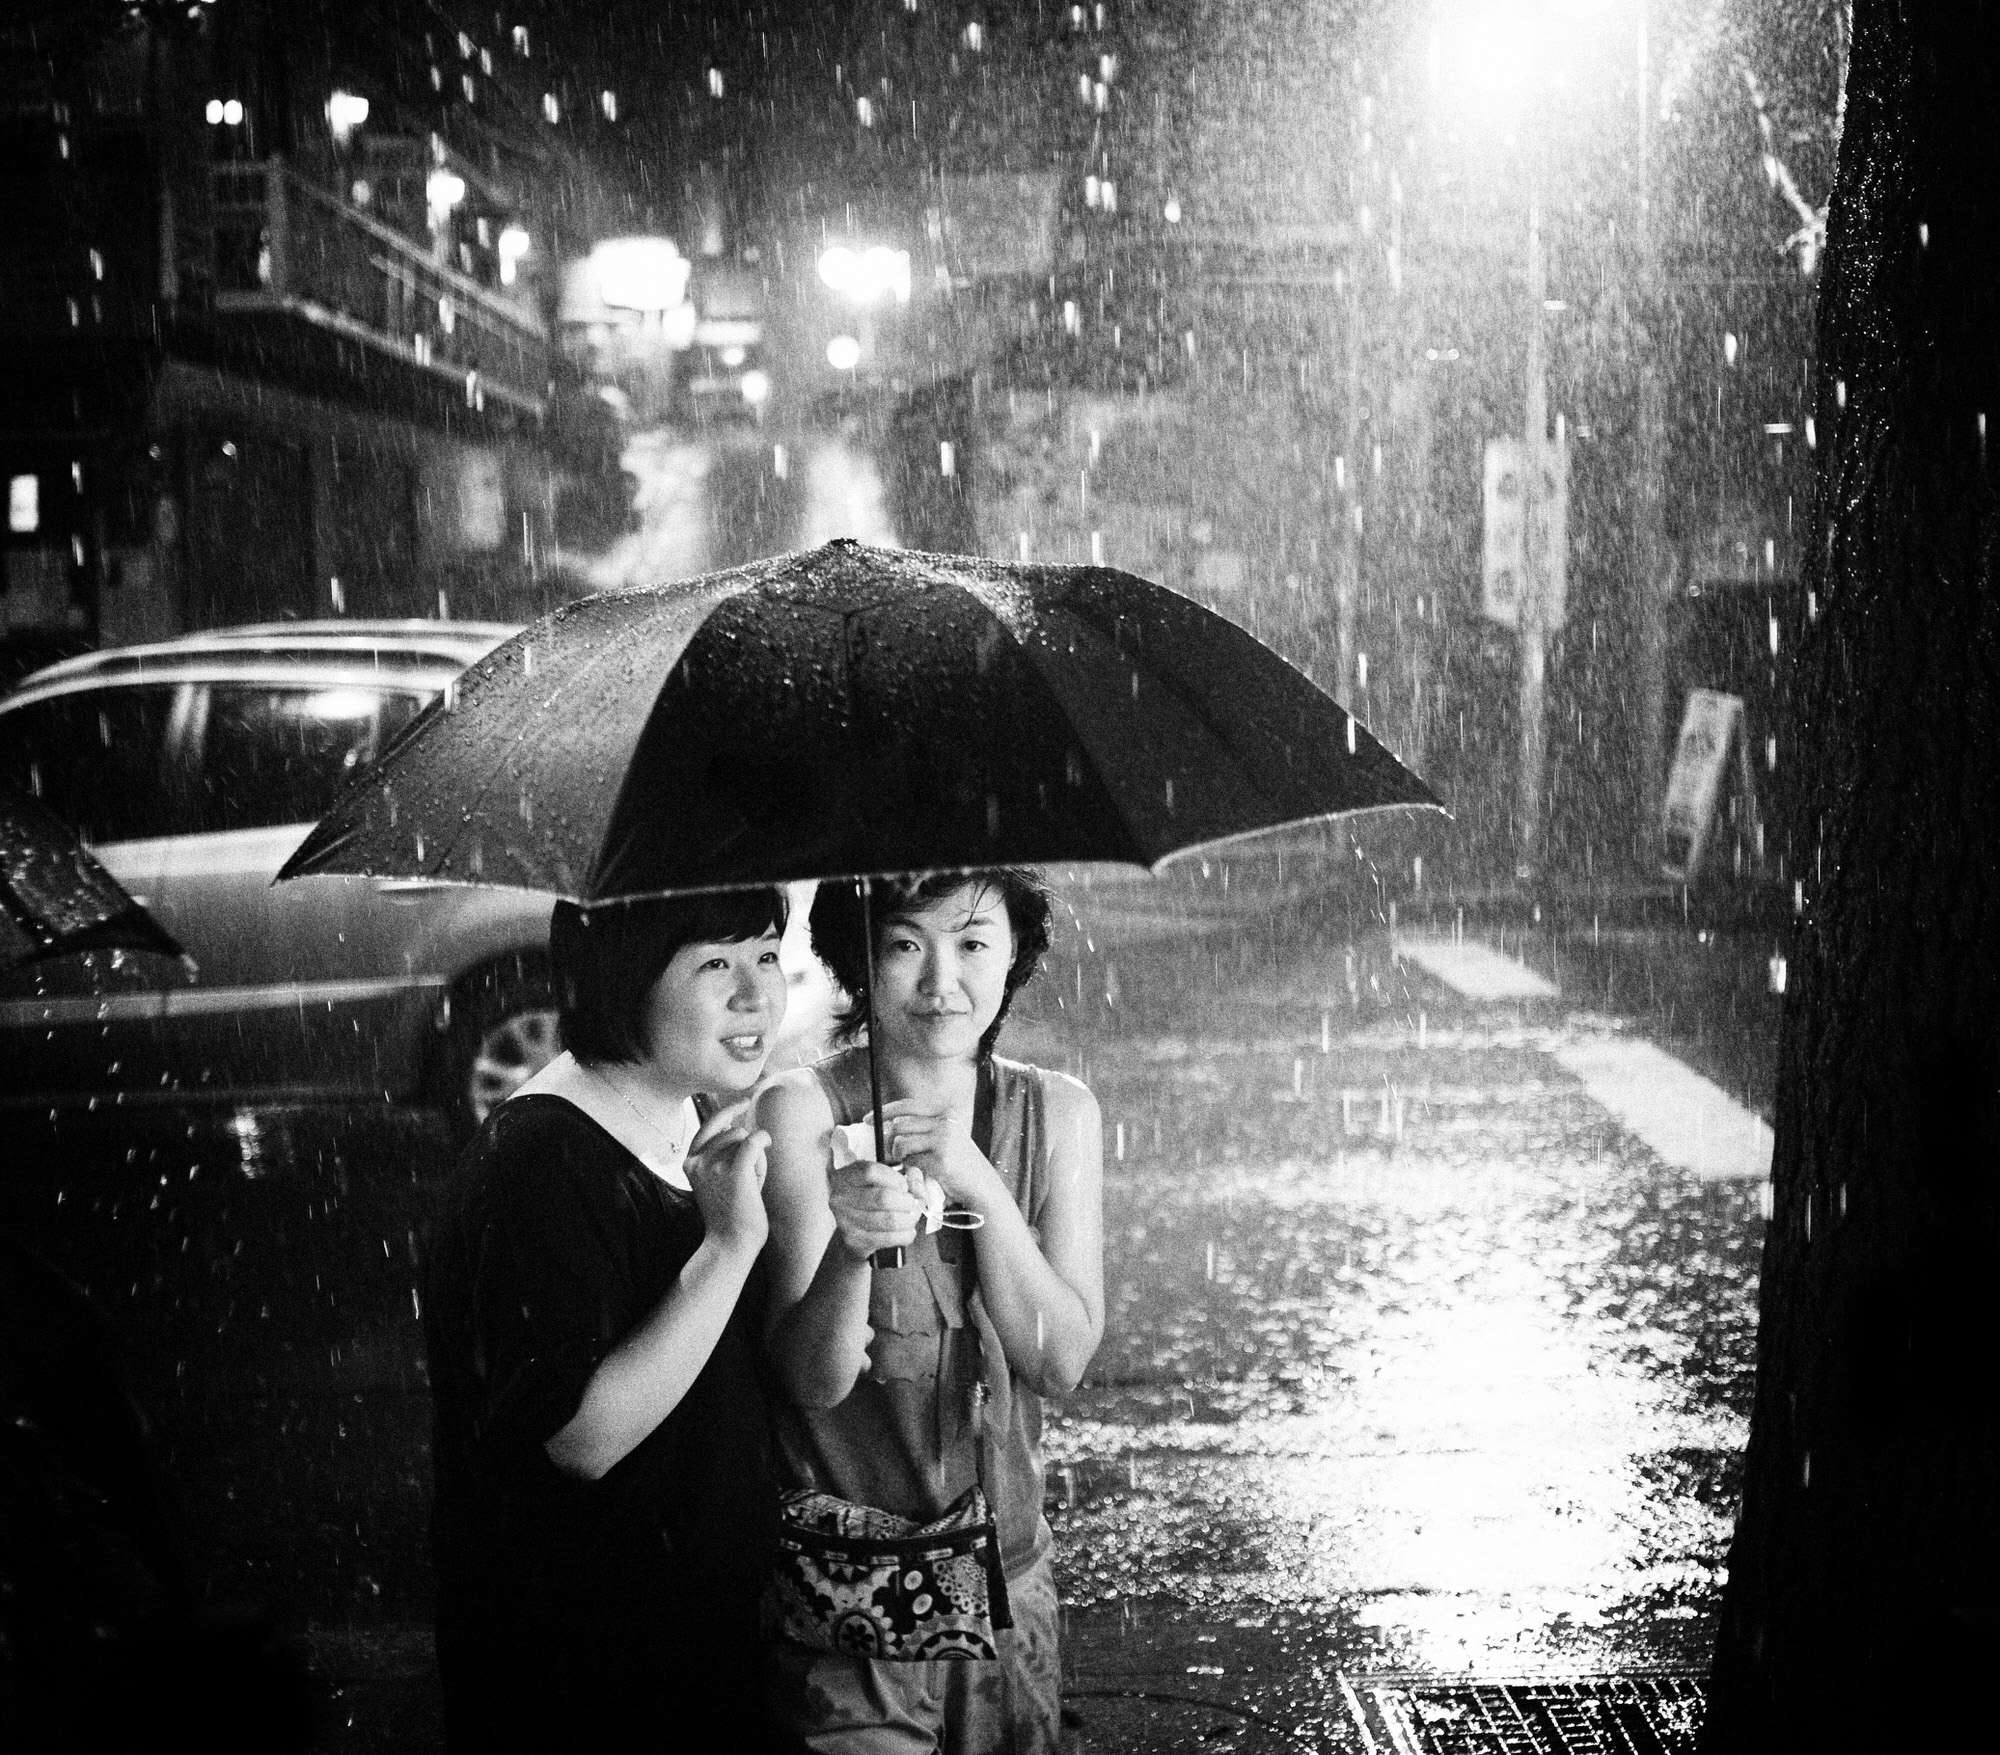 Two girls in the rain. Seoul, 2009 / Canon 5D